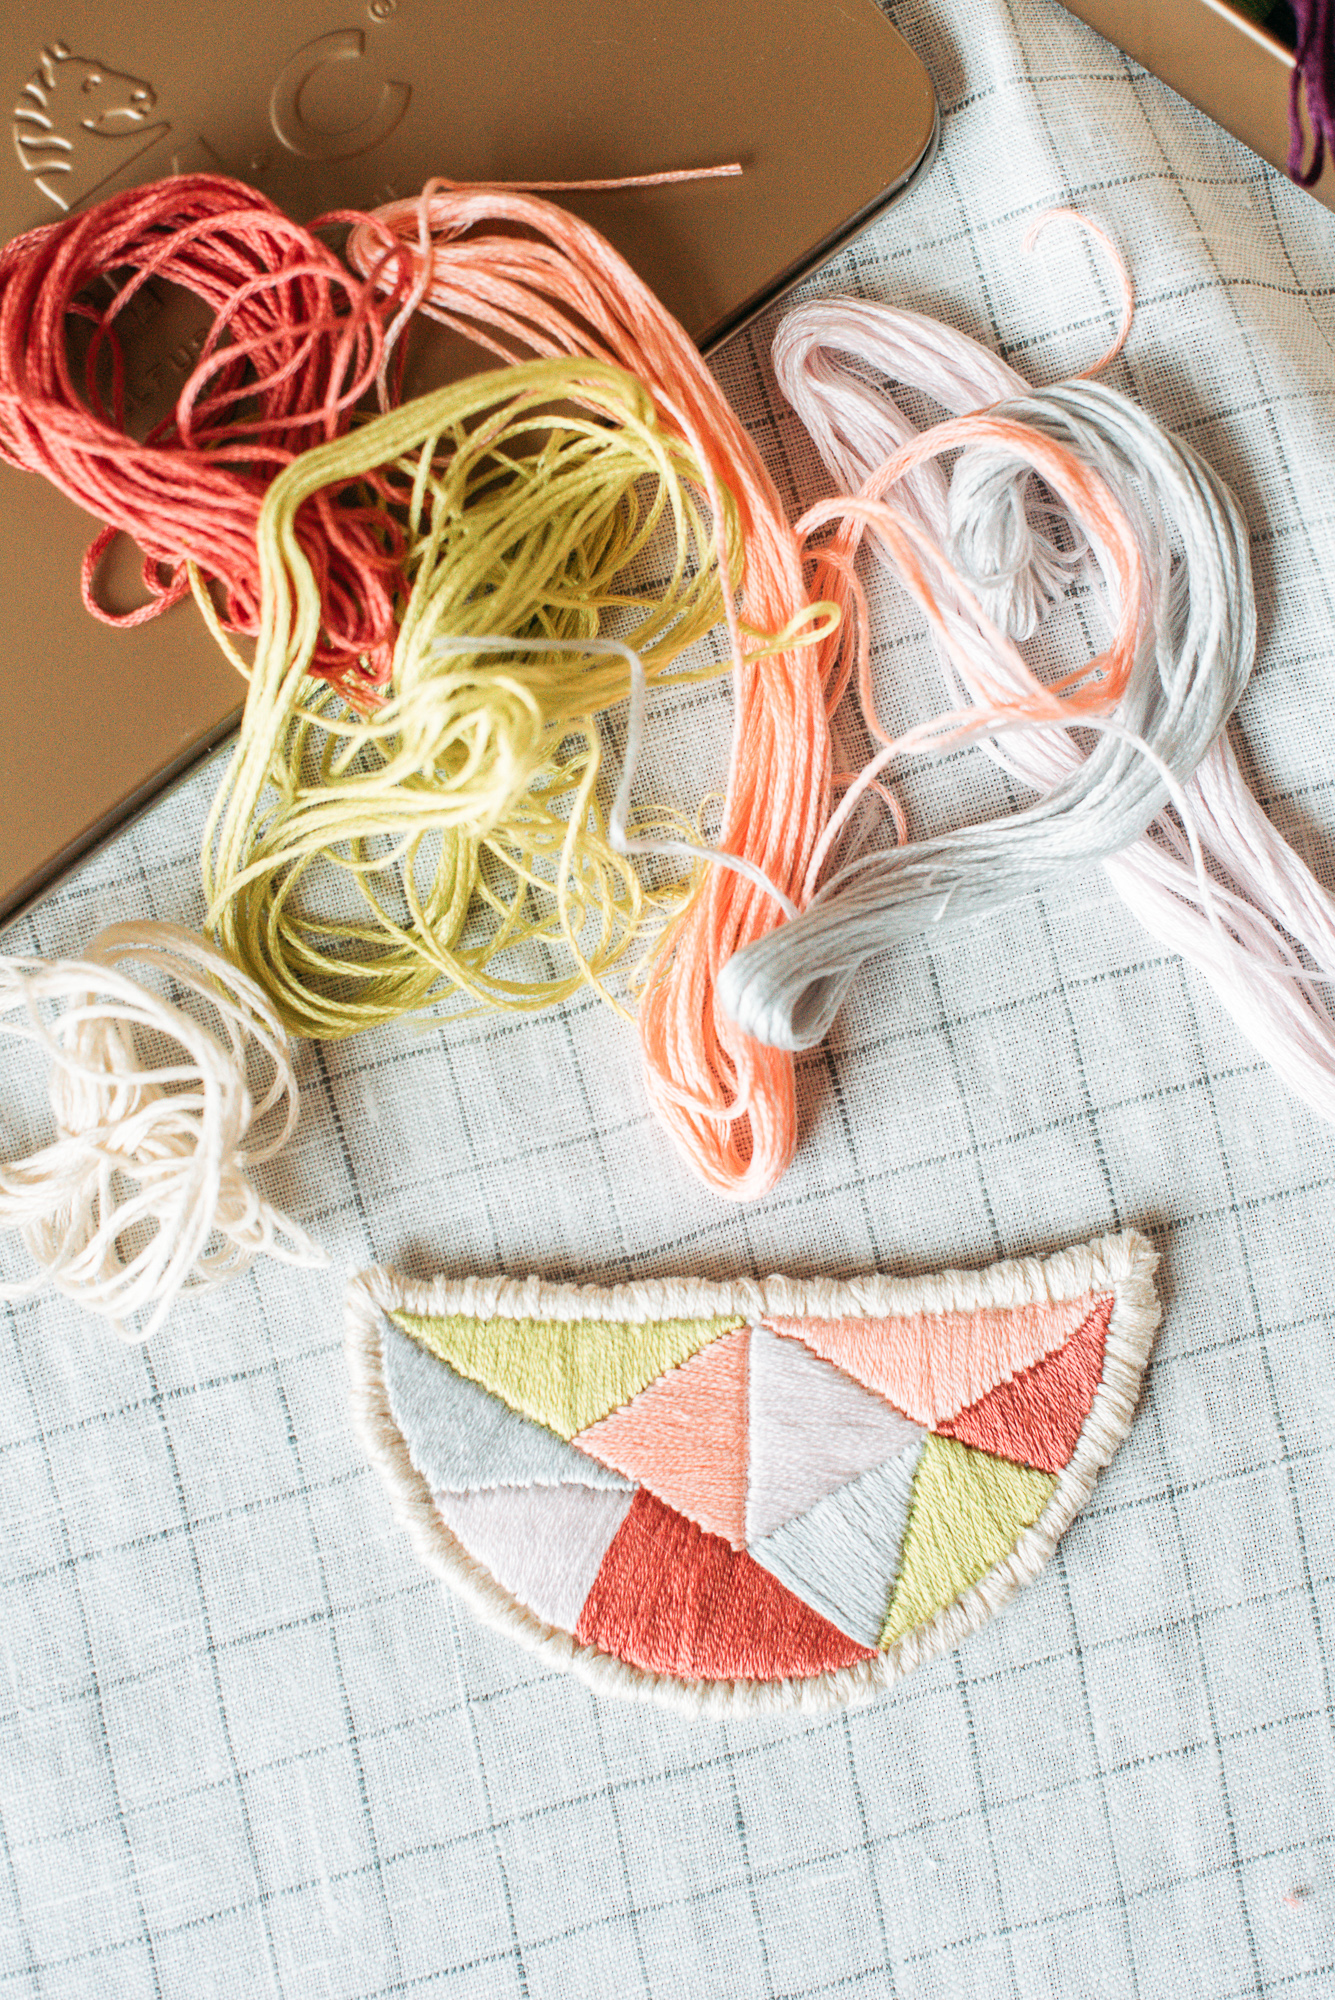 DIY embroidered necklace Dear Handmade Life